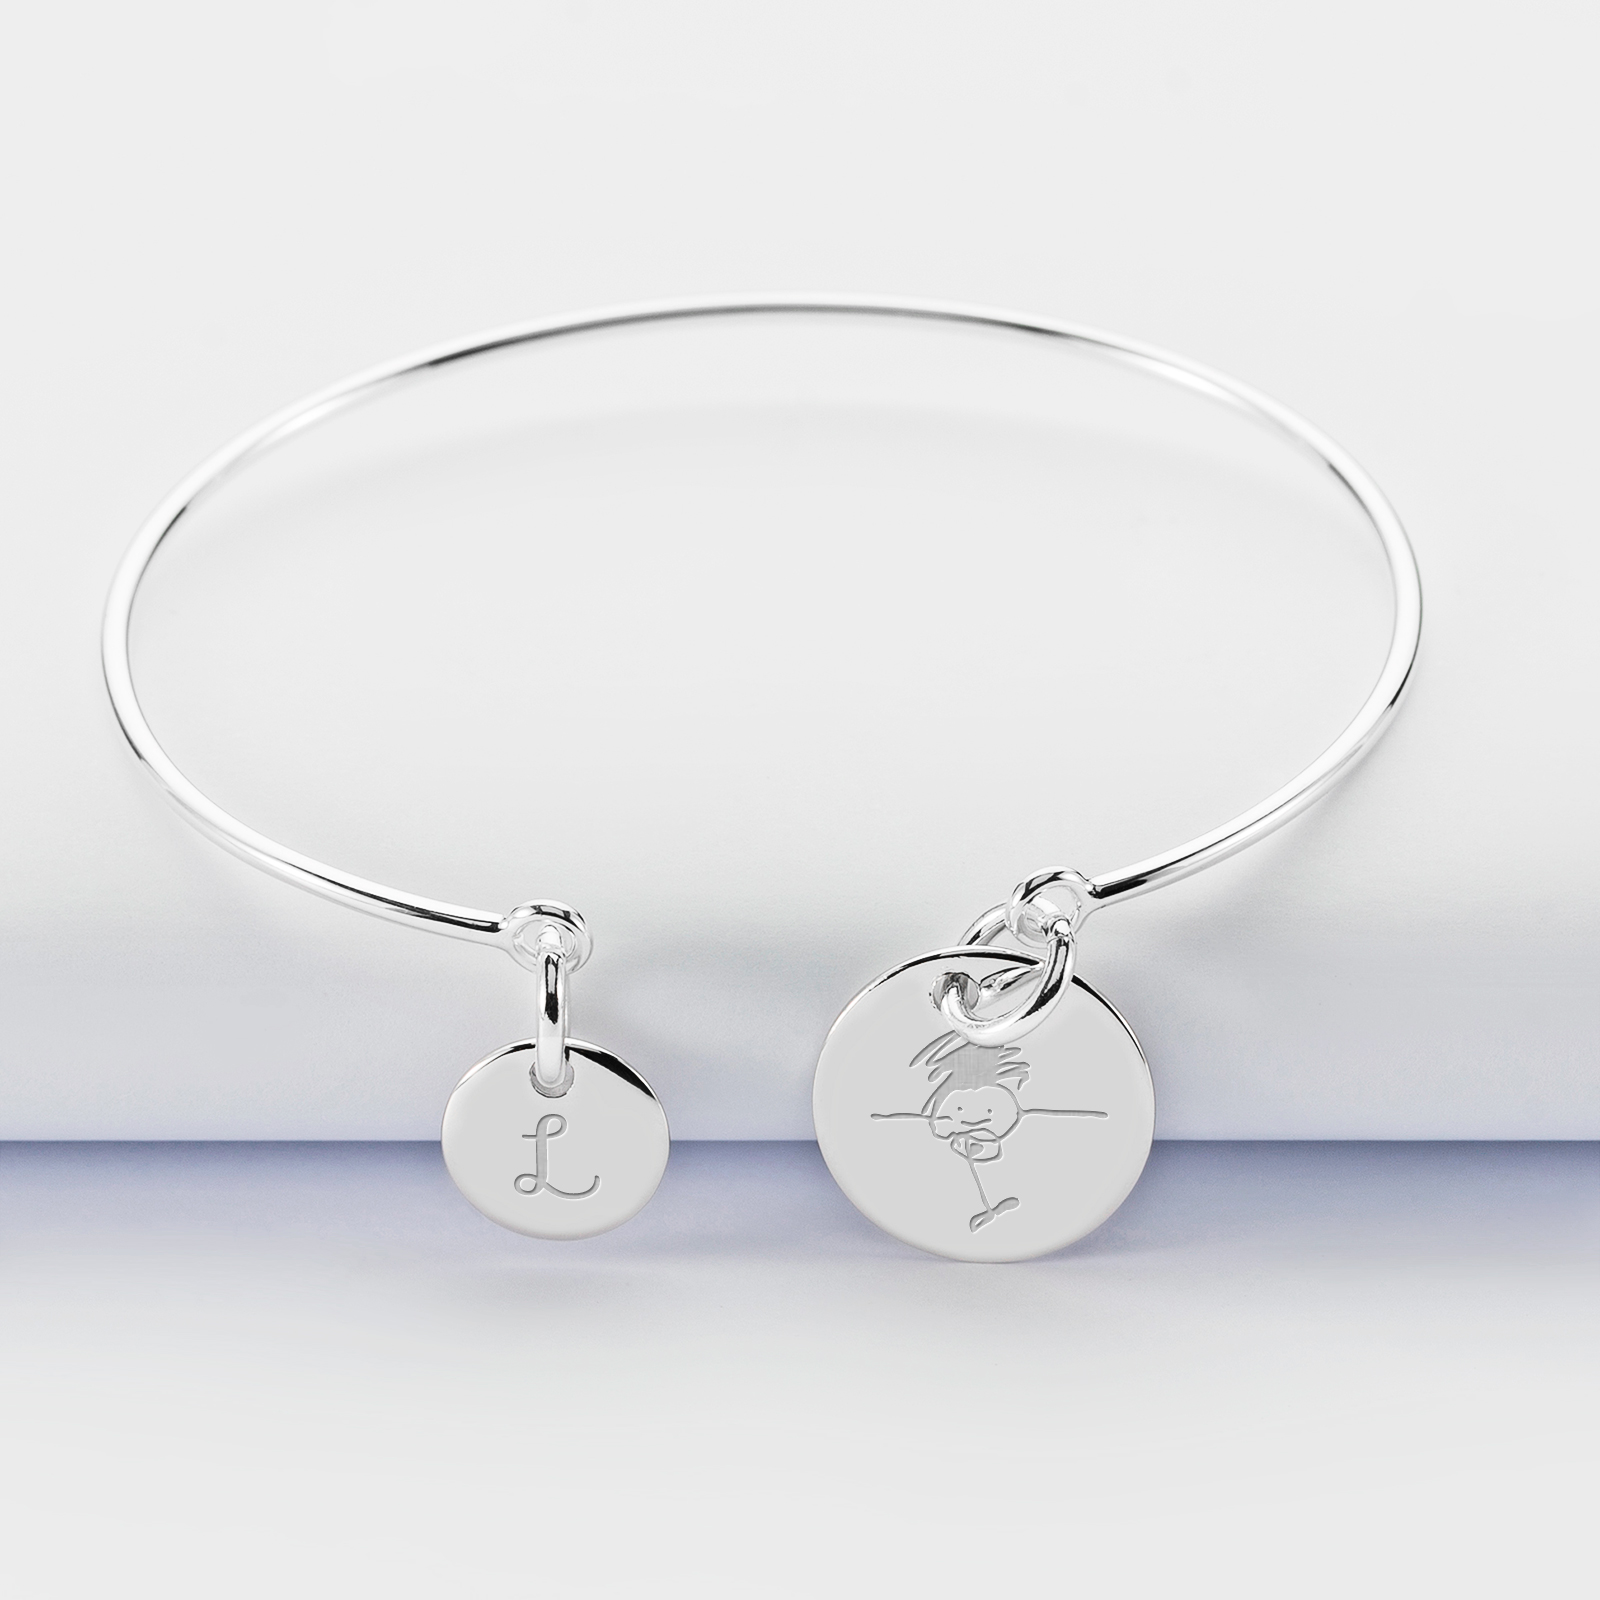 Personalised silver engraved 15mm bangle and round 10mm charm - sketch